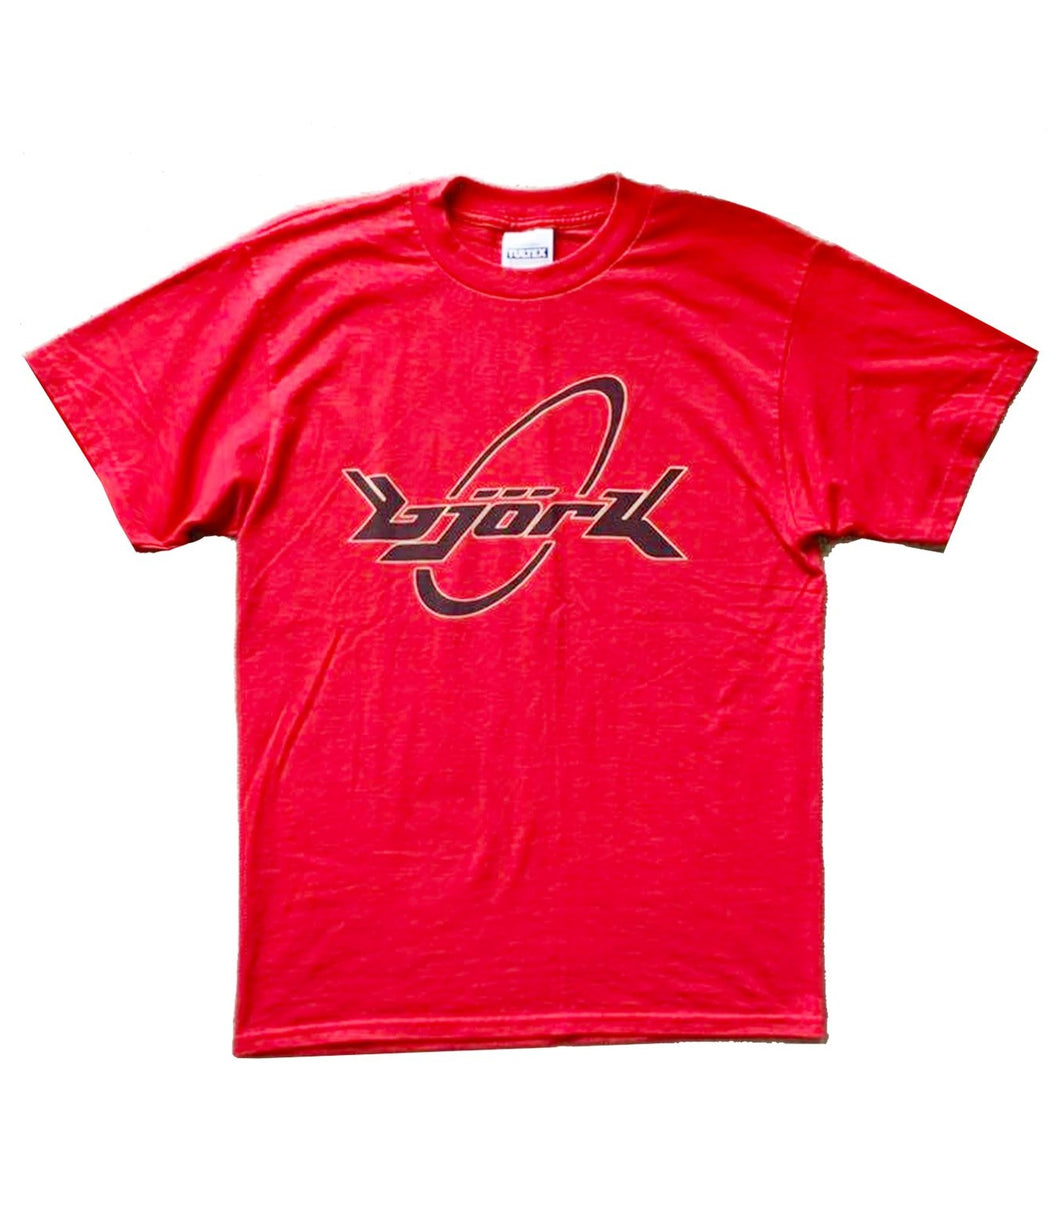 Bjork Limited Edition Red T-Shirt